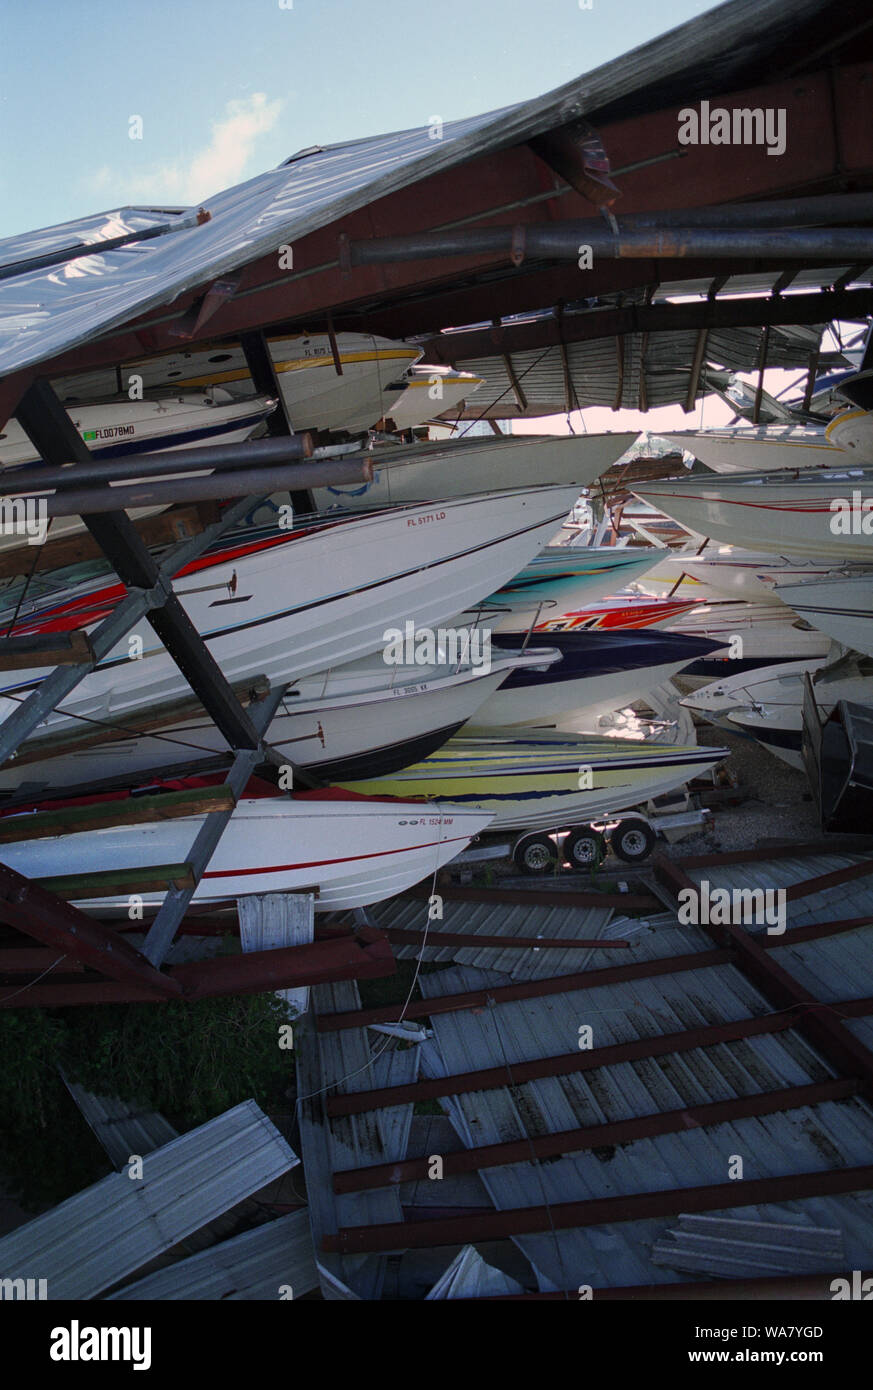 Hurricane damage of multilevel boat storage in Sunny Isles Beach (Miami, Florida, USA), collapsed destroying many boats and several vehicles parked inside during hurricane Wilma in October 2005 Stock Photo